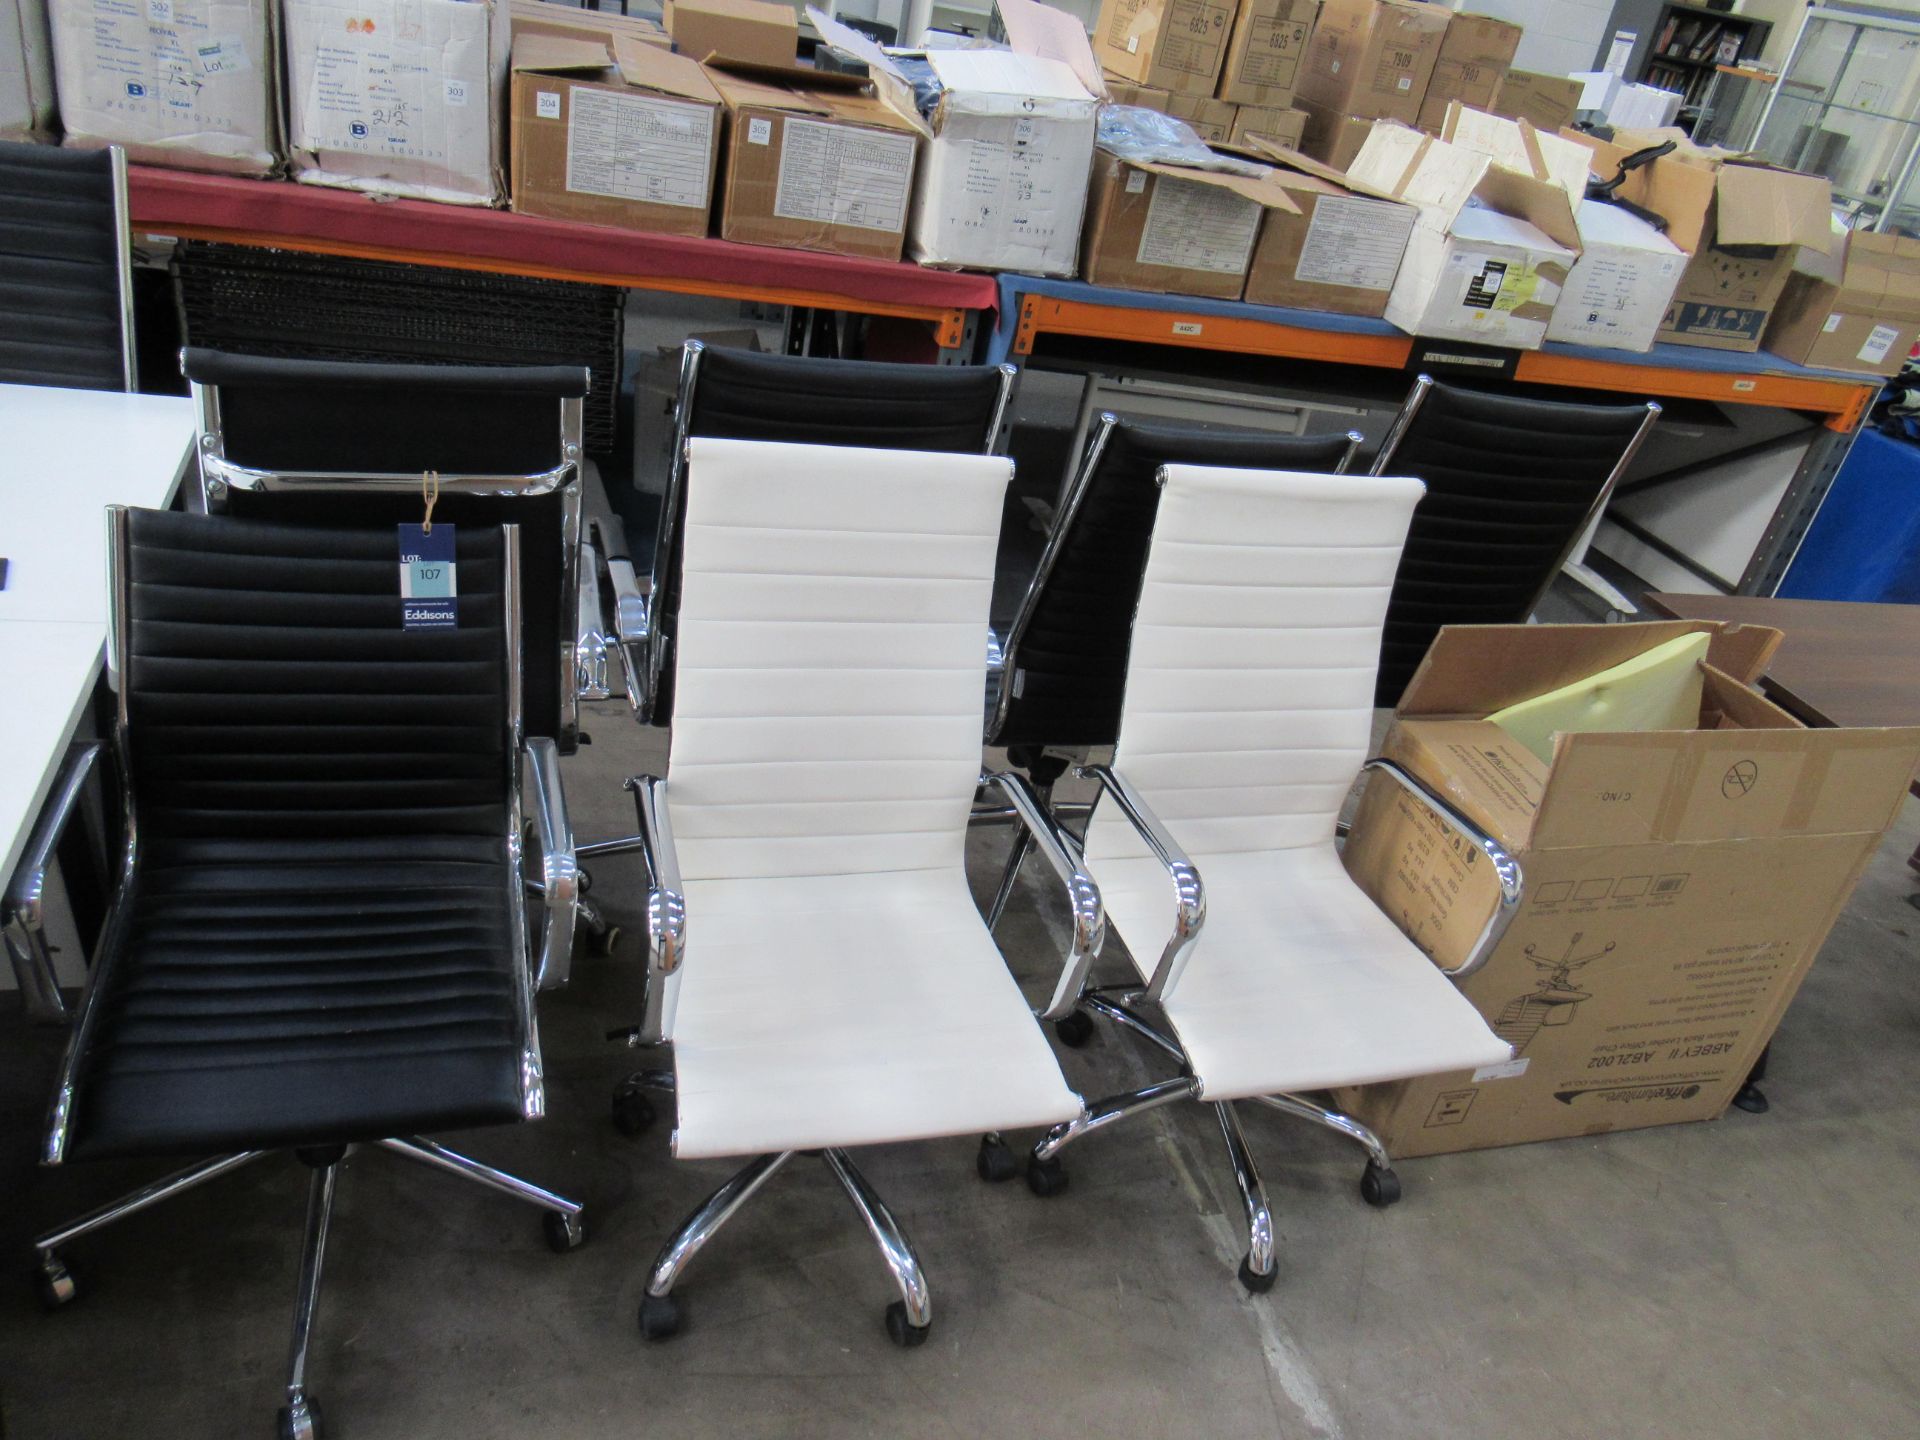 8 x Ribbed Leather and Chrome Operators Chairs (6 x Black, 2 x White) including one boxed and unused